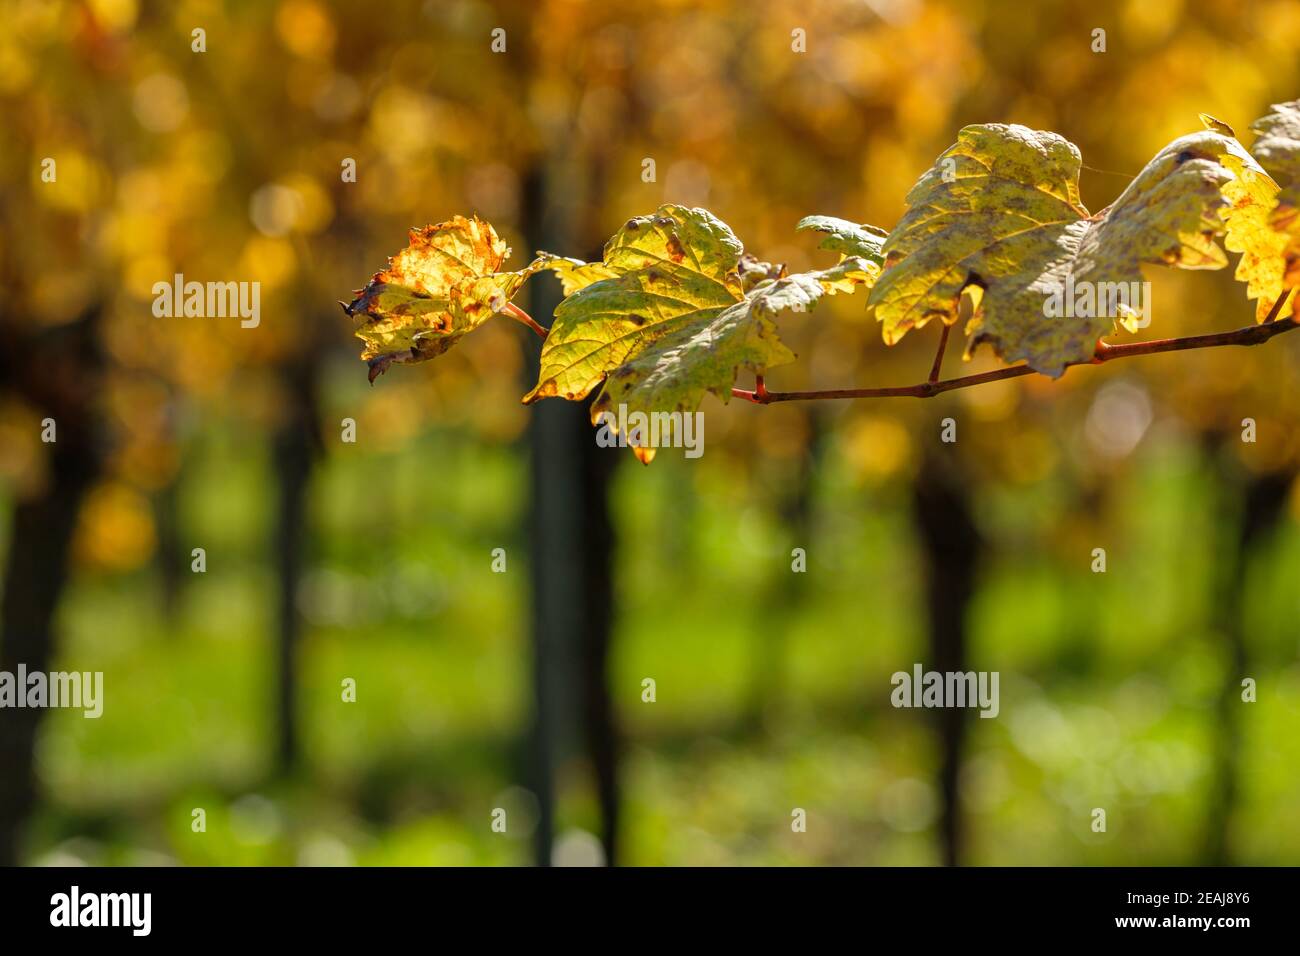 Yellow grapevine leaves in a vineyard Stock Photo